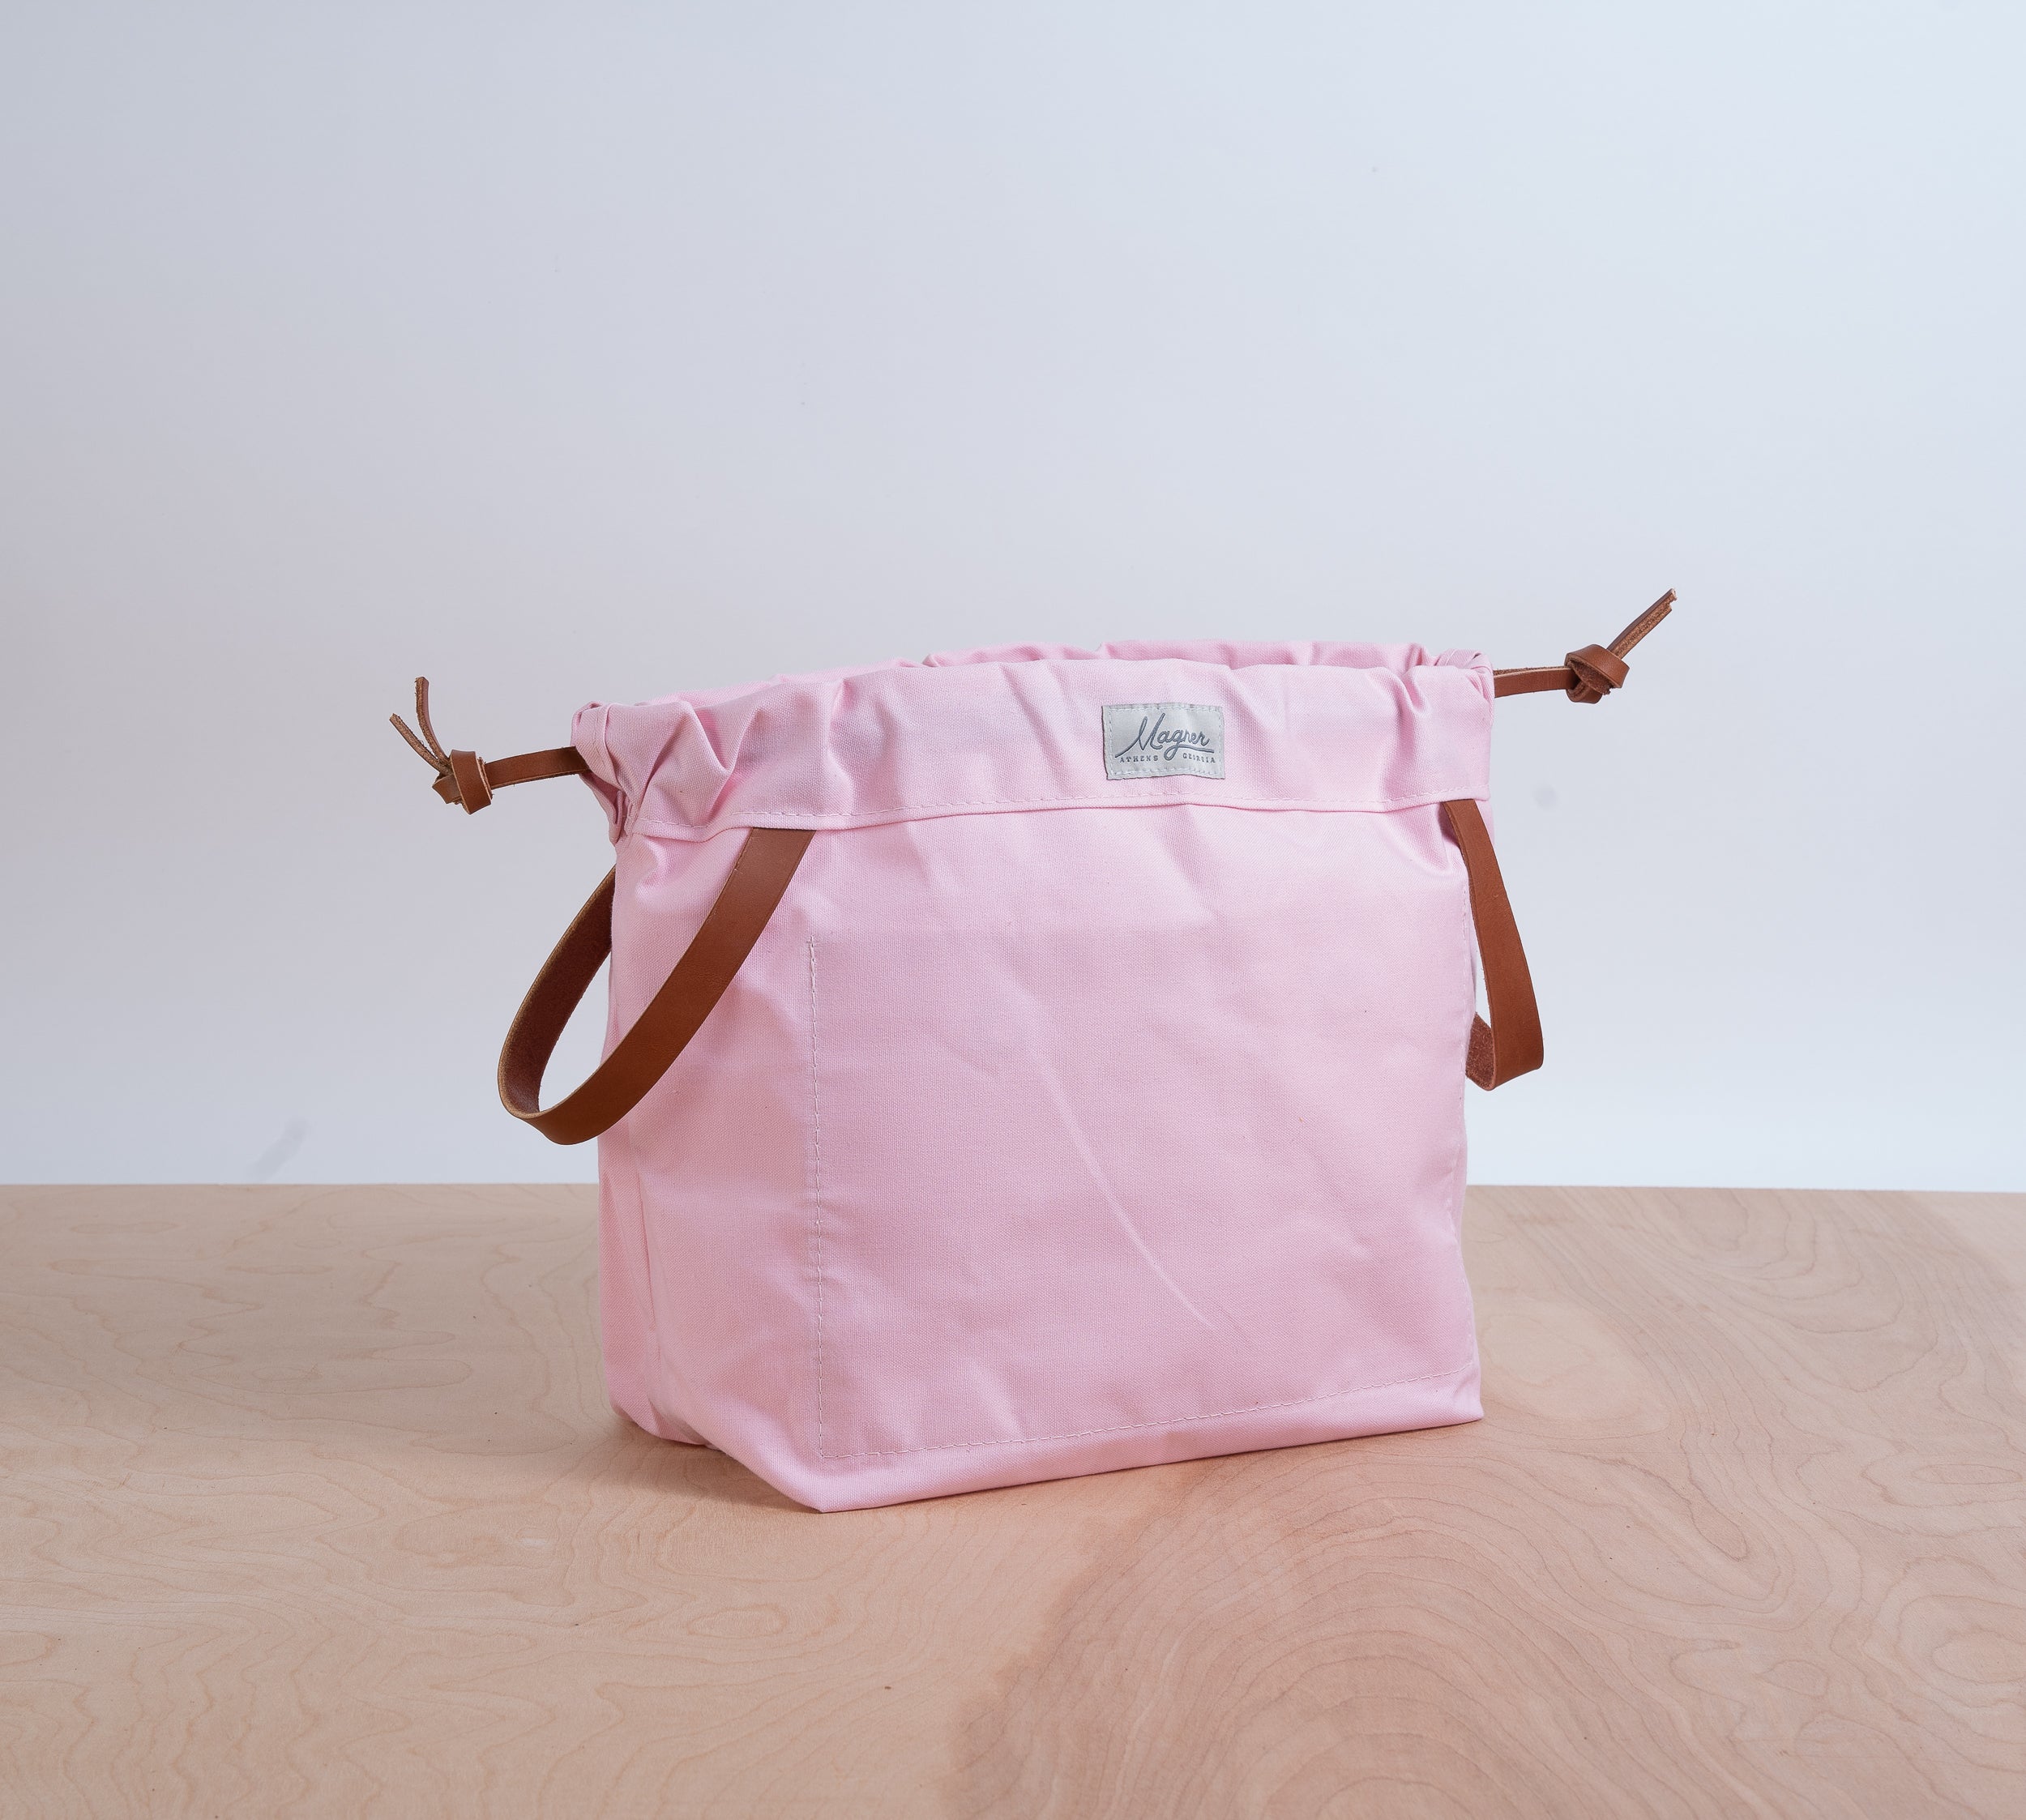 Magner Co. Knitty Gritty Project Bag - Biggie Size